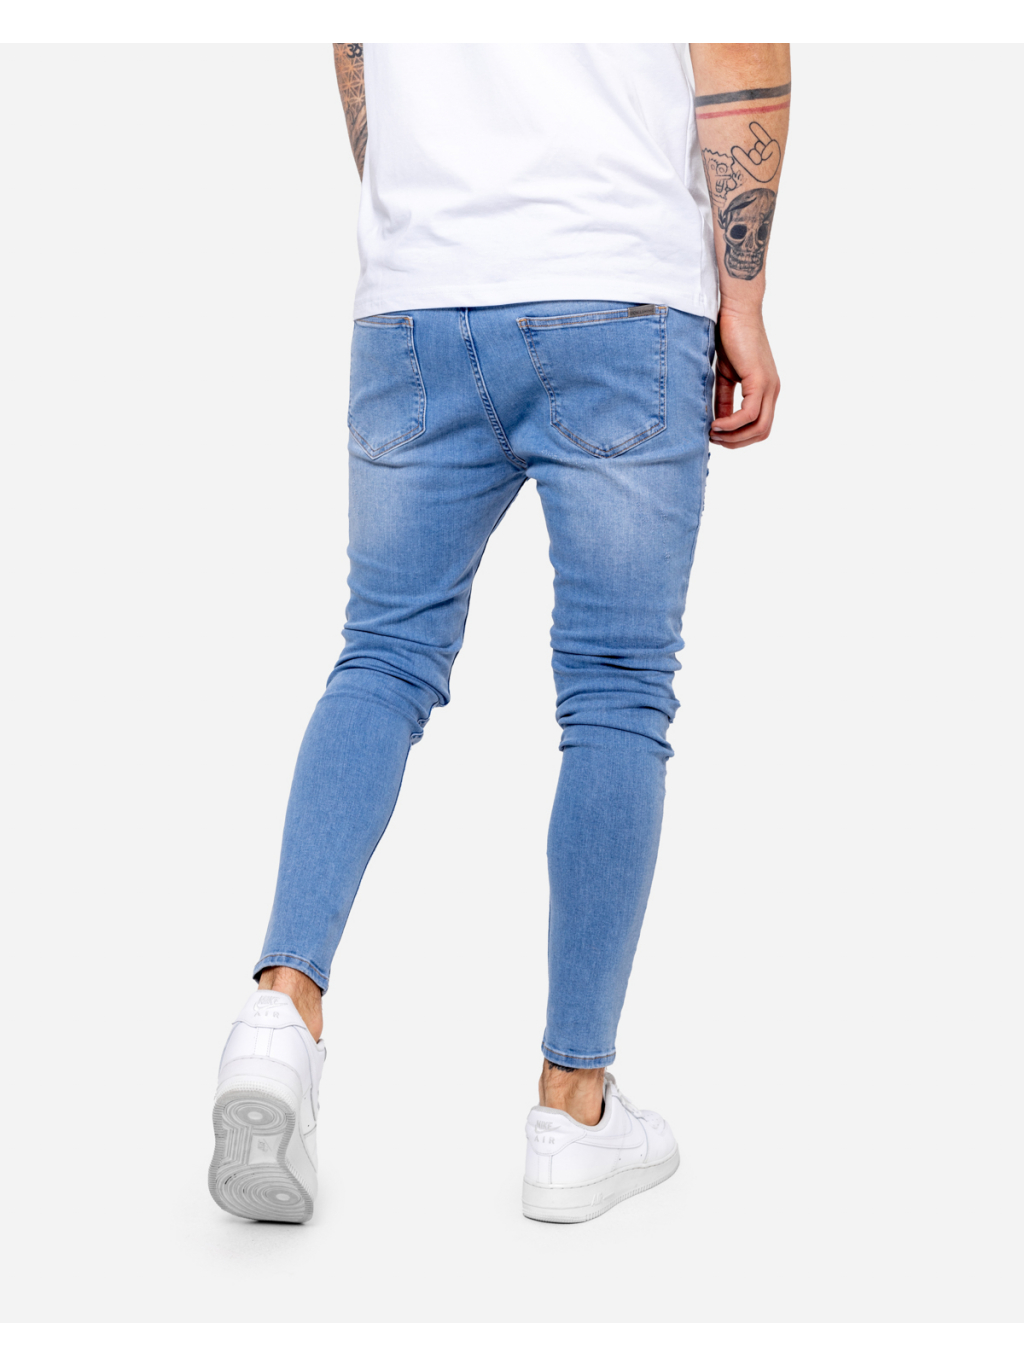 Jeans Ruined - Donlemme.com